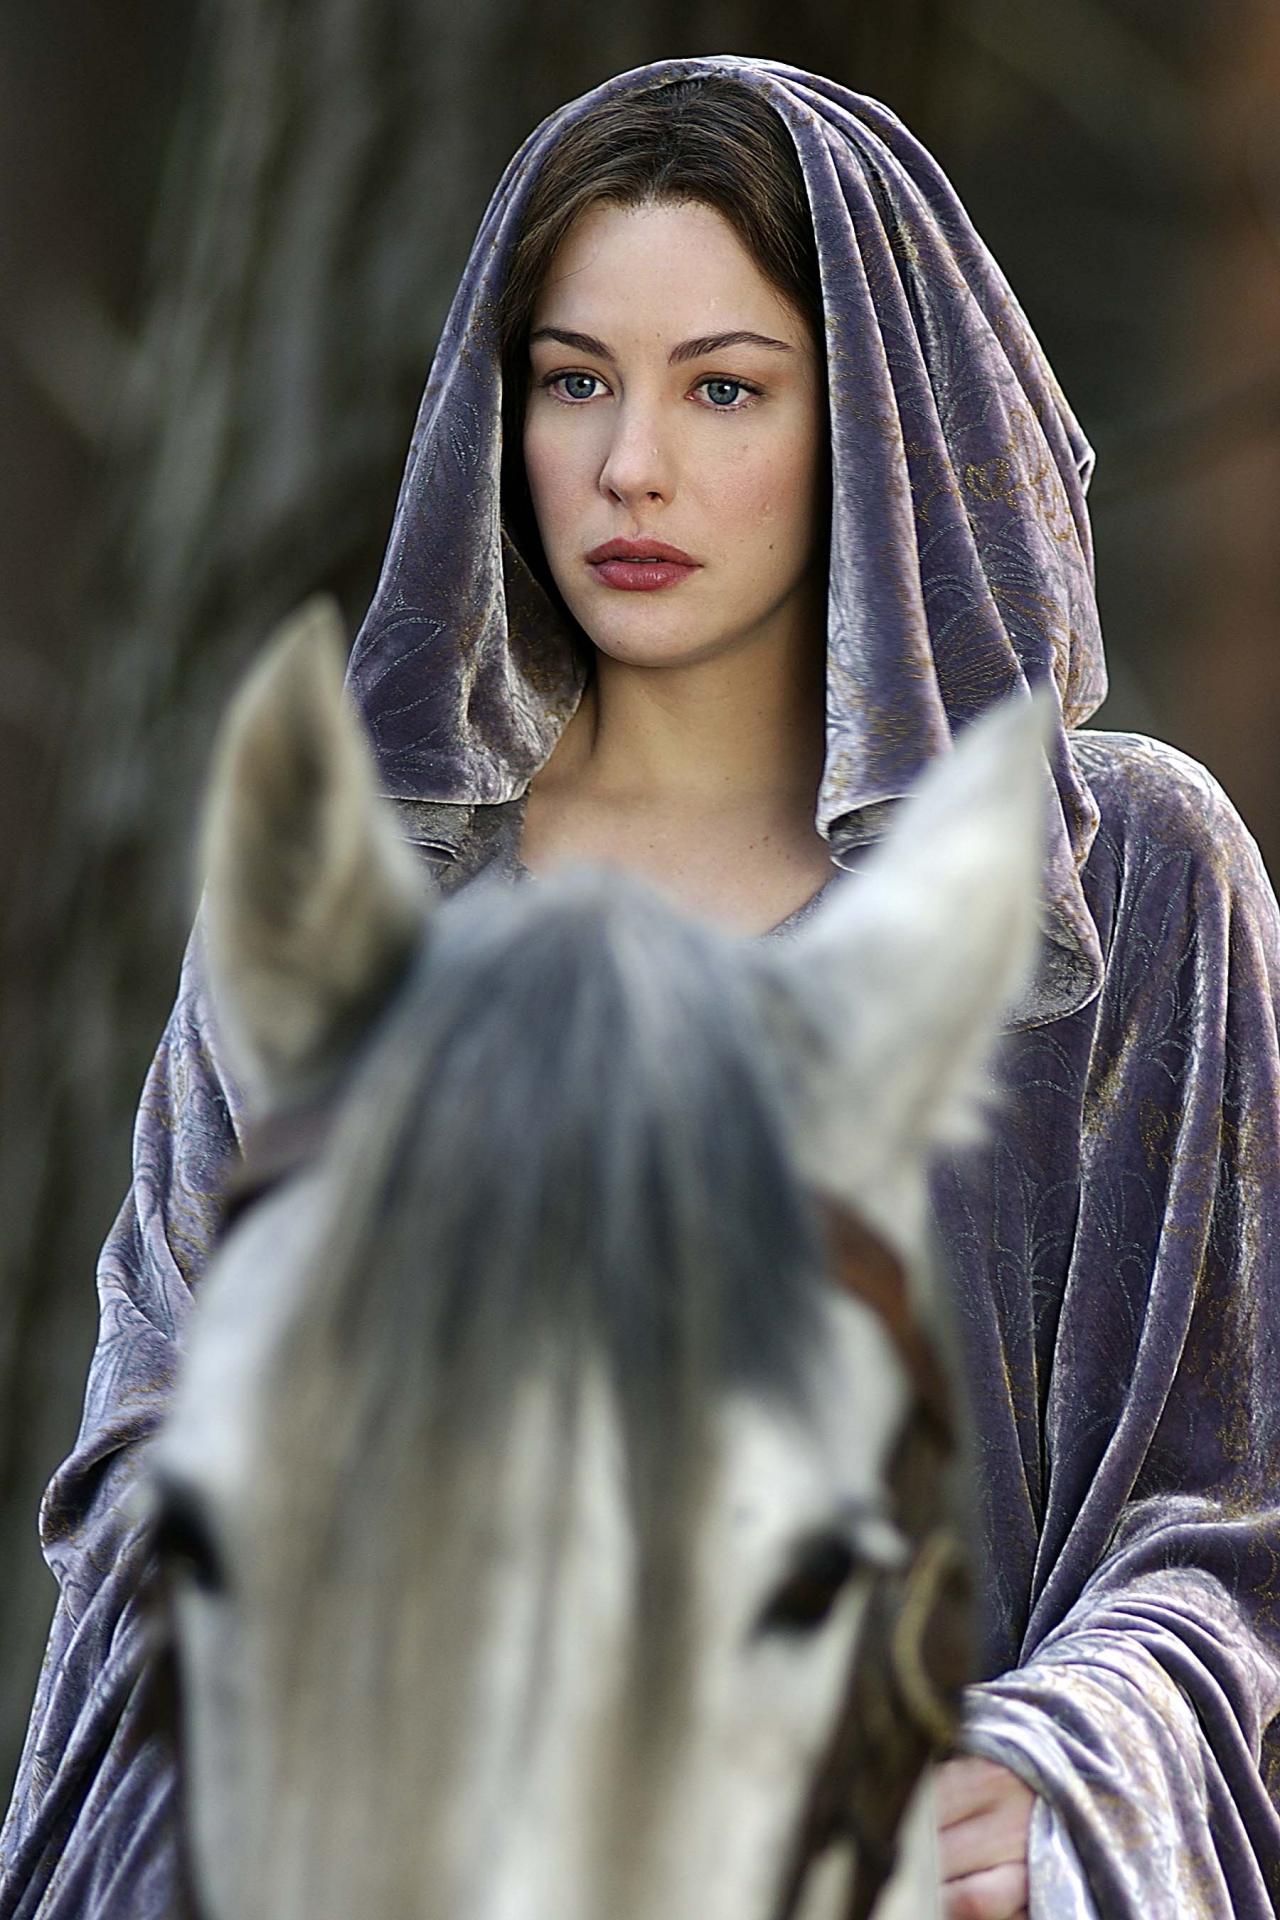 liv_tyler_the_lord_of_the_ring_1800x2700_wallpapername.com.jpg